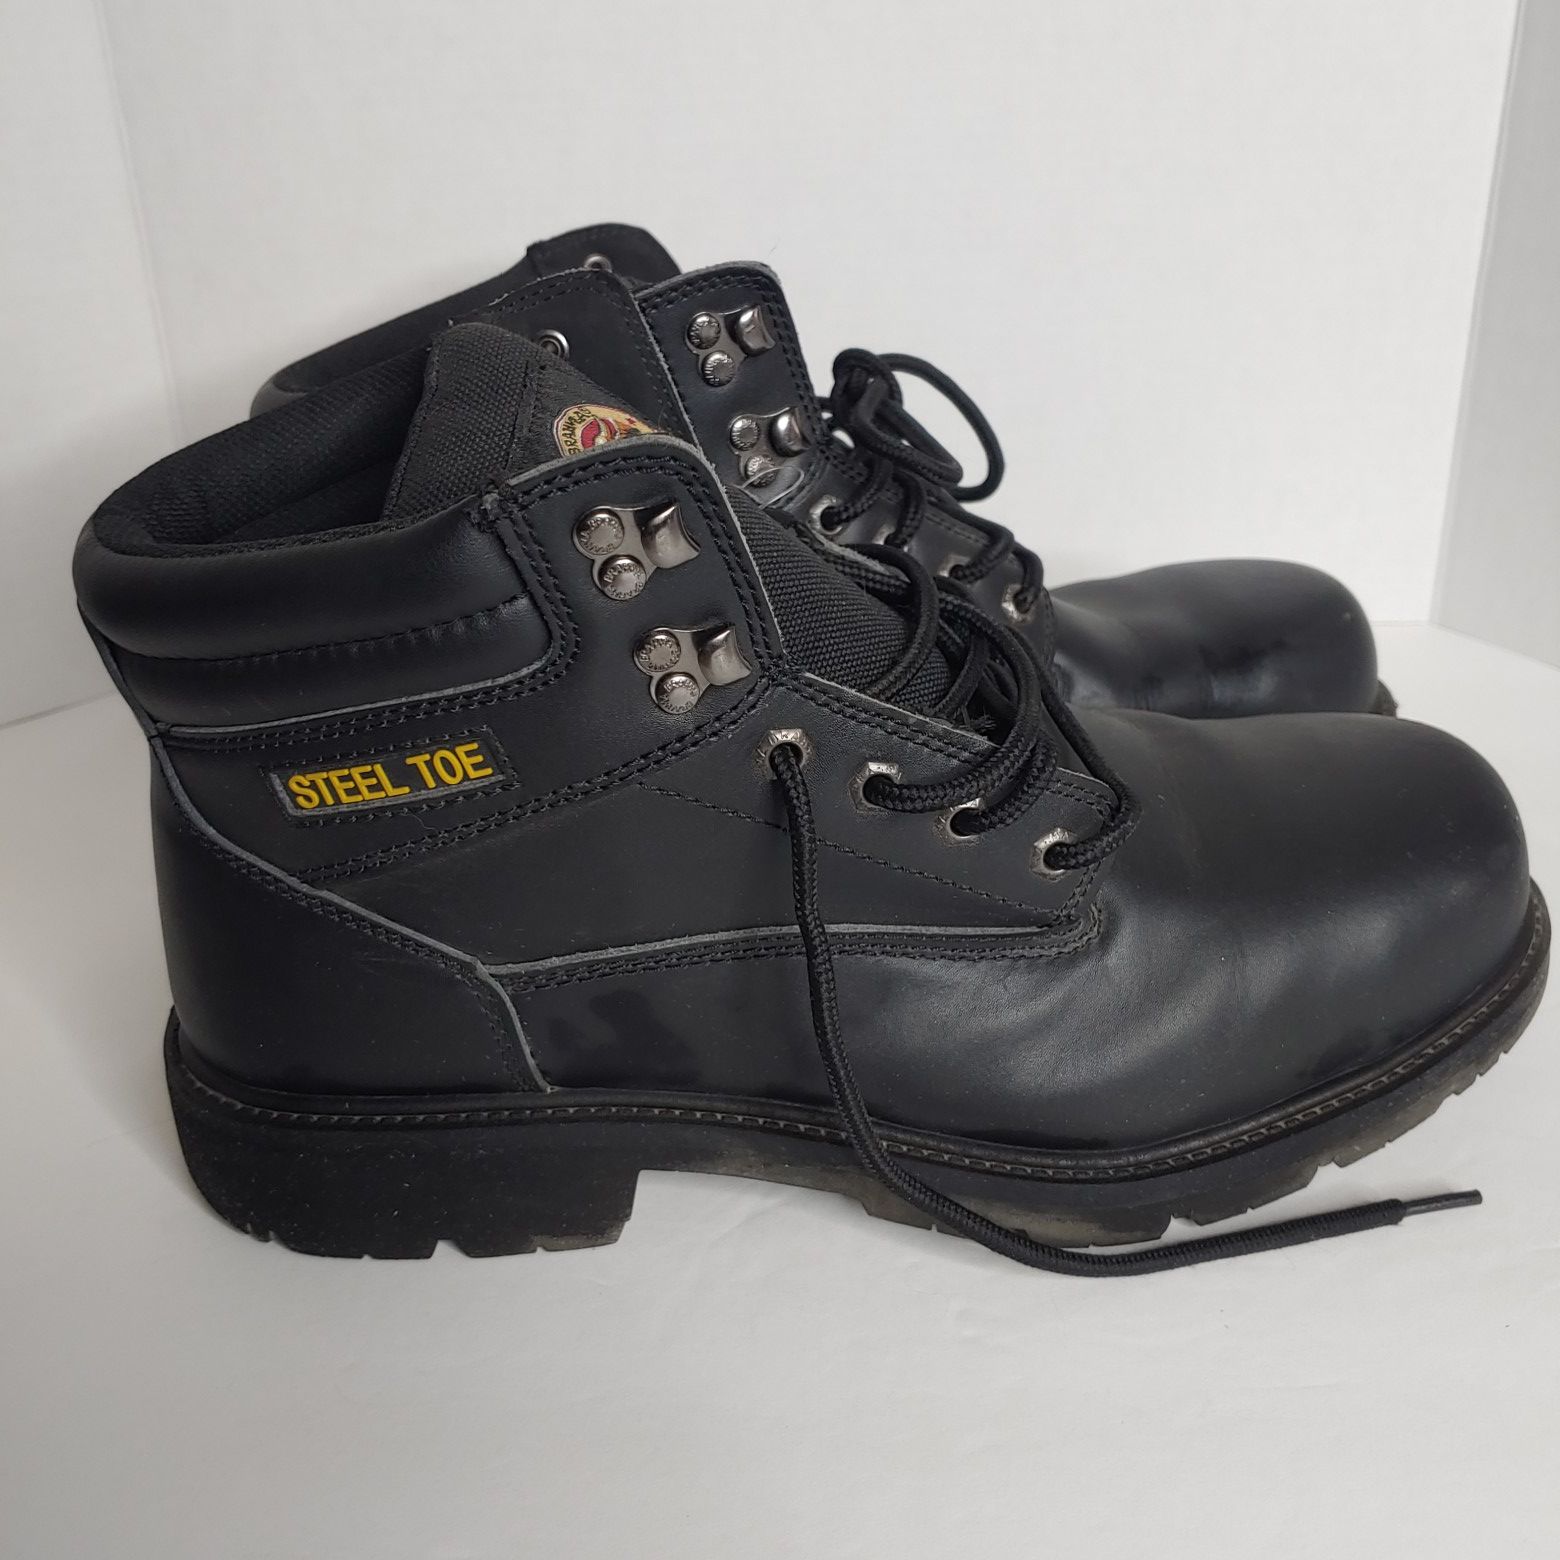 Braum mens work boots Steel toe Leather uppers Size 13 Black Lace up Used in good condition soles are in good shape